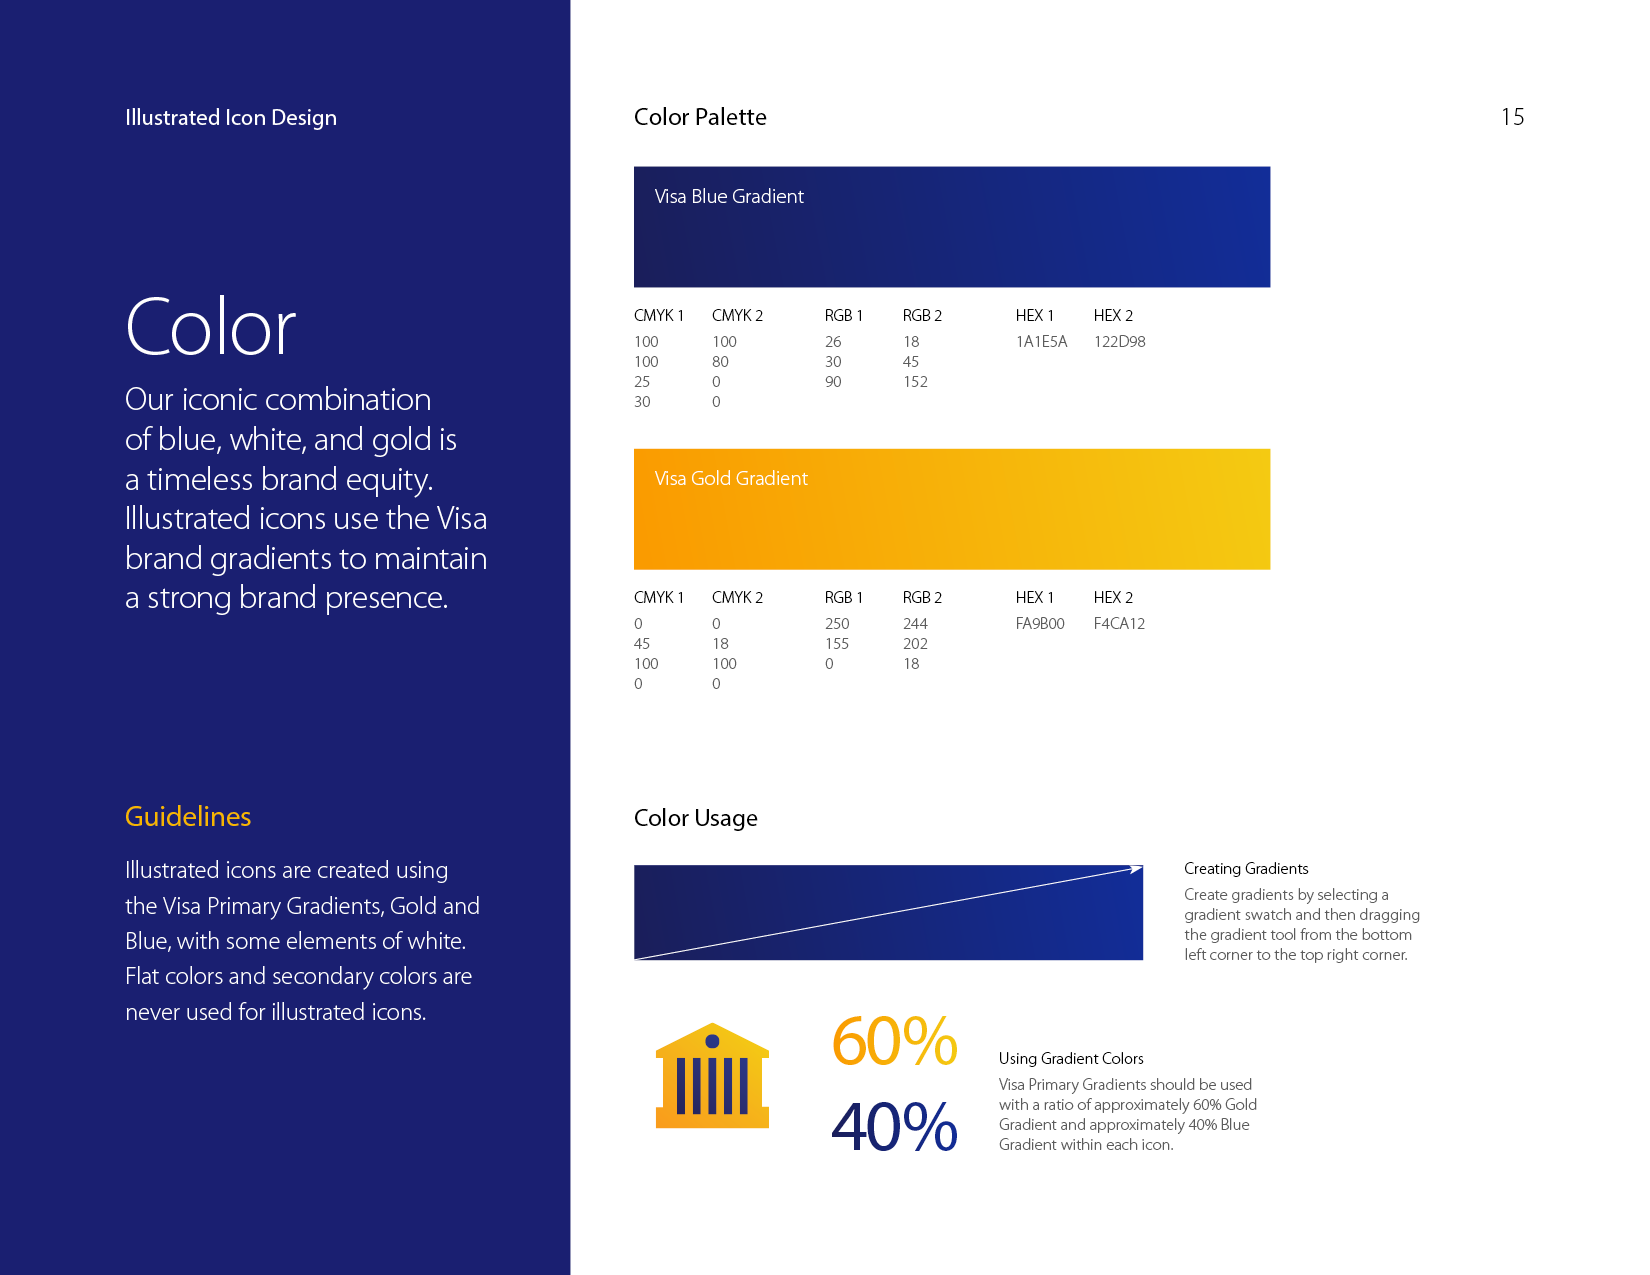 Visa illustrated icons style guide colors